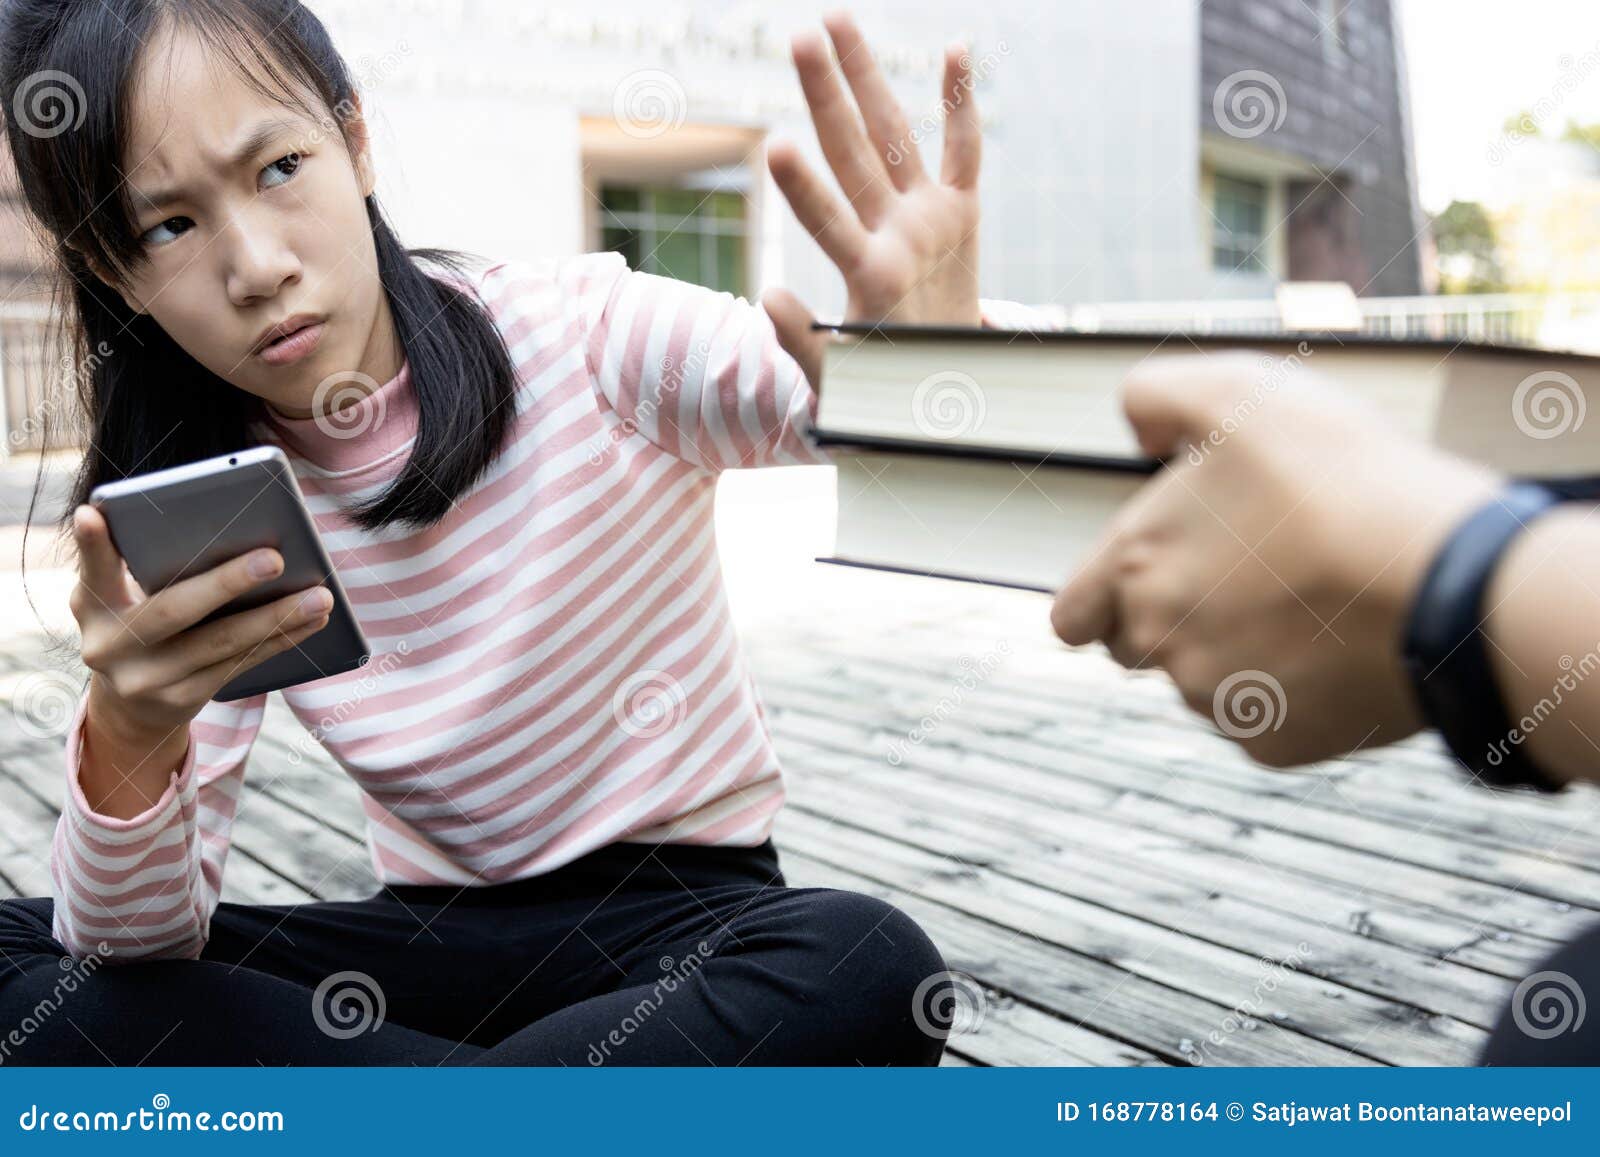 asian child girl is avoiding reading book,she wants to use a mobile phone,addicted to smartphone,teenage student is refusing to